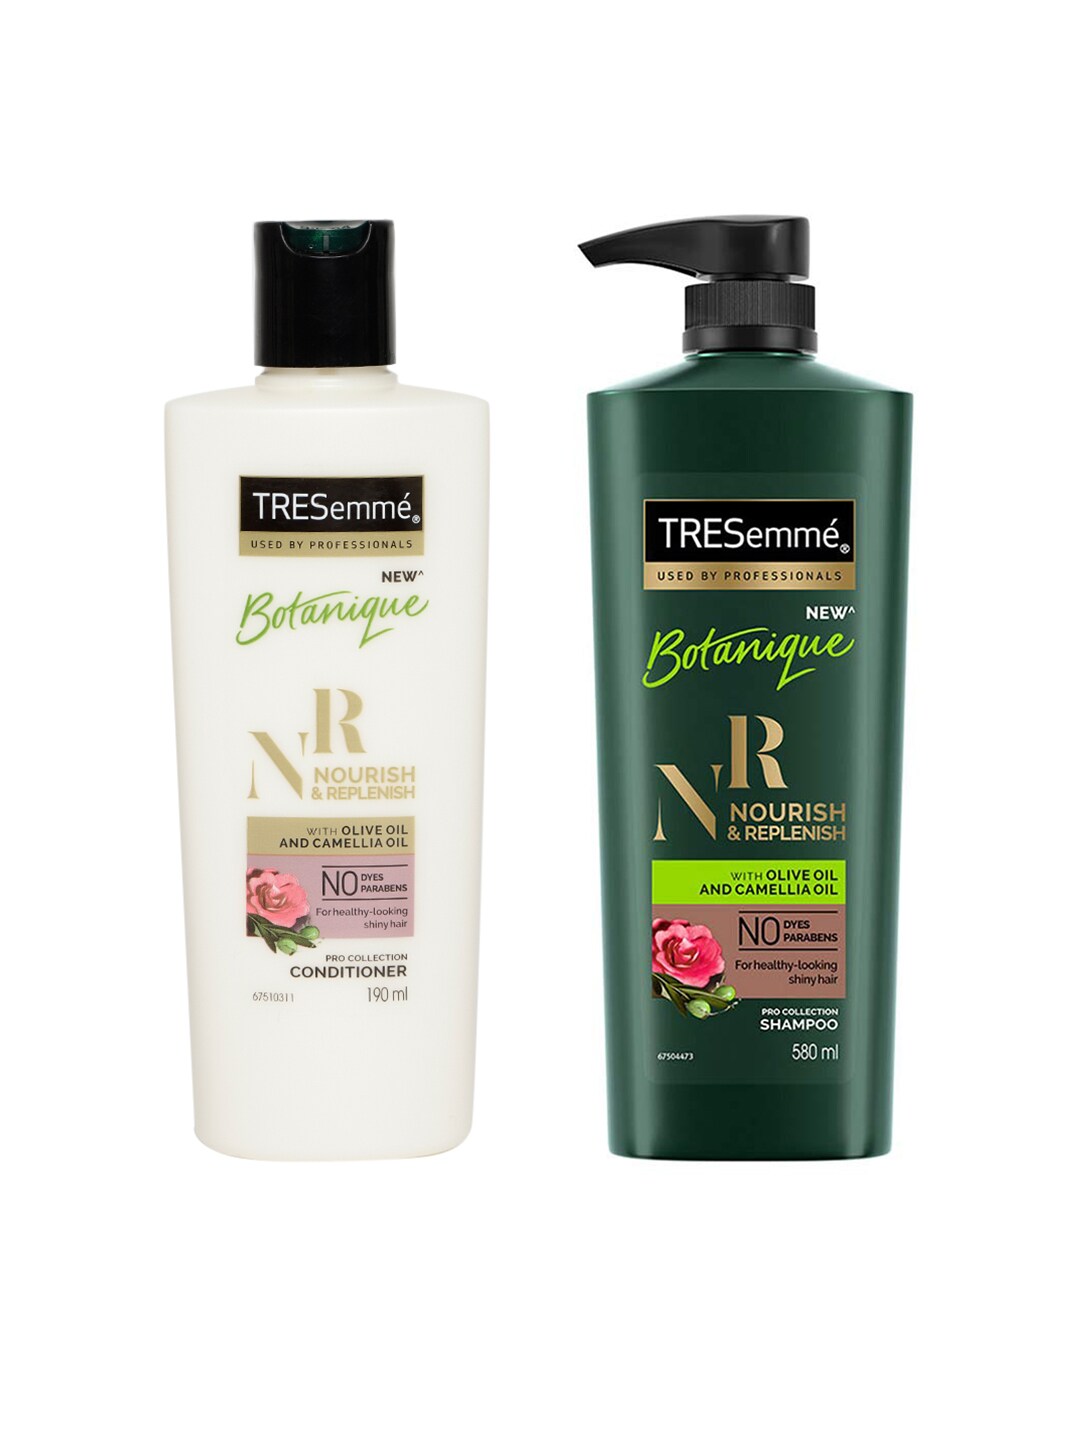 TRESemme Set of Nourish & Replenish Pro Collection Conditioner & Shampoo Price in India